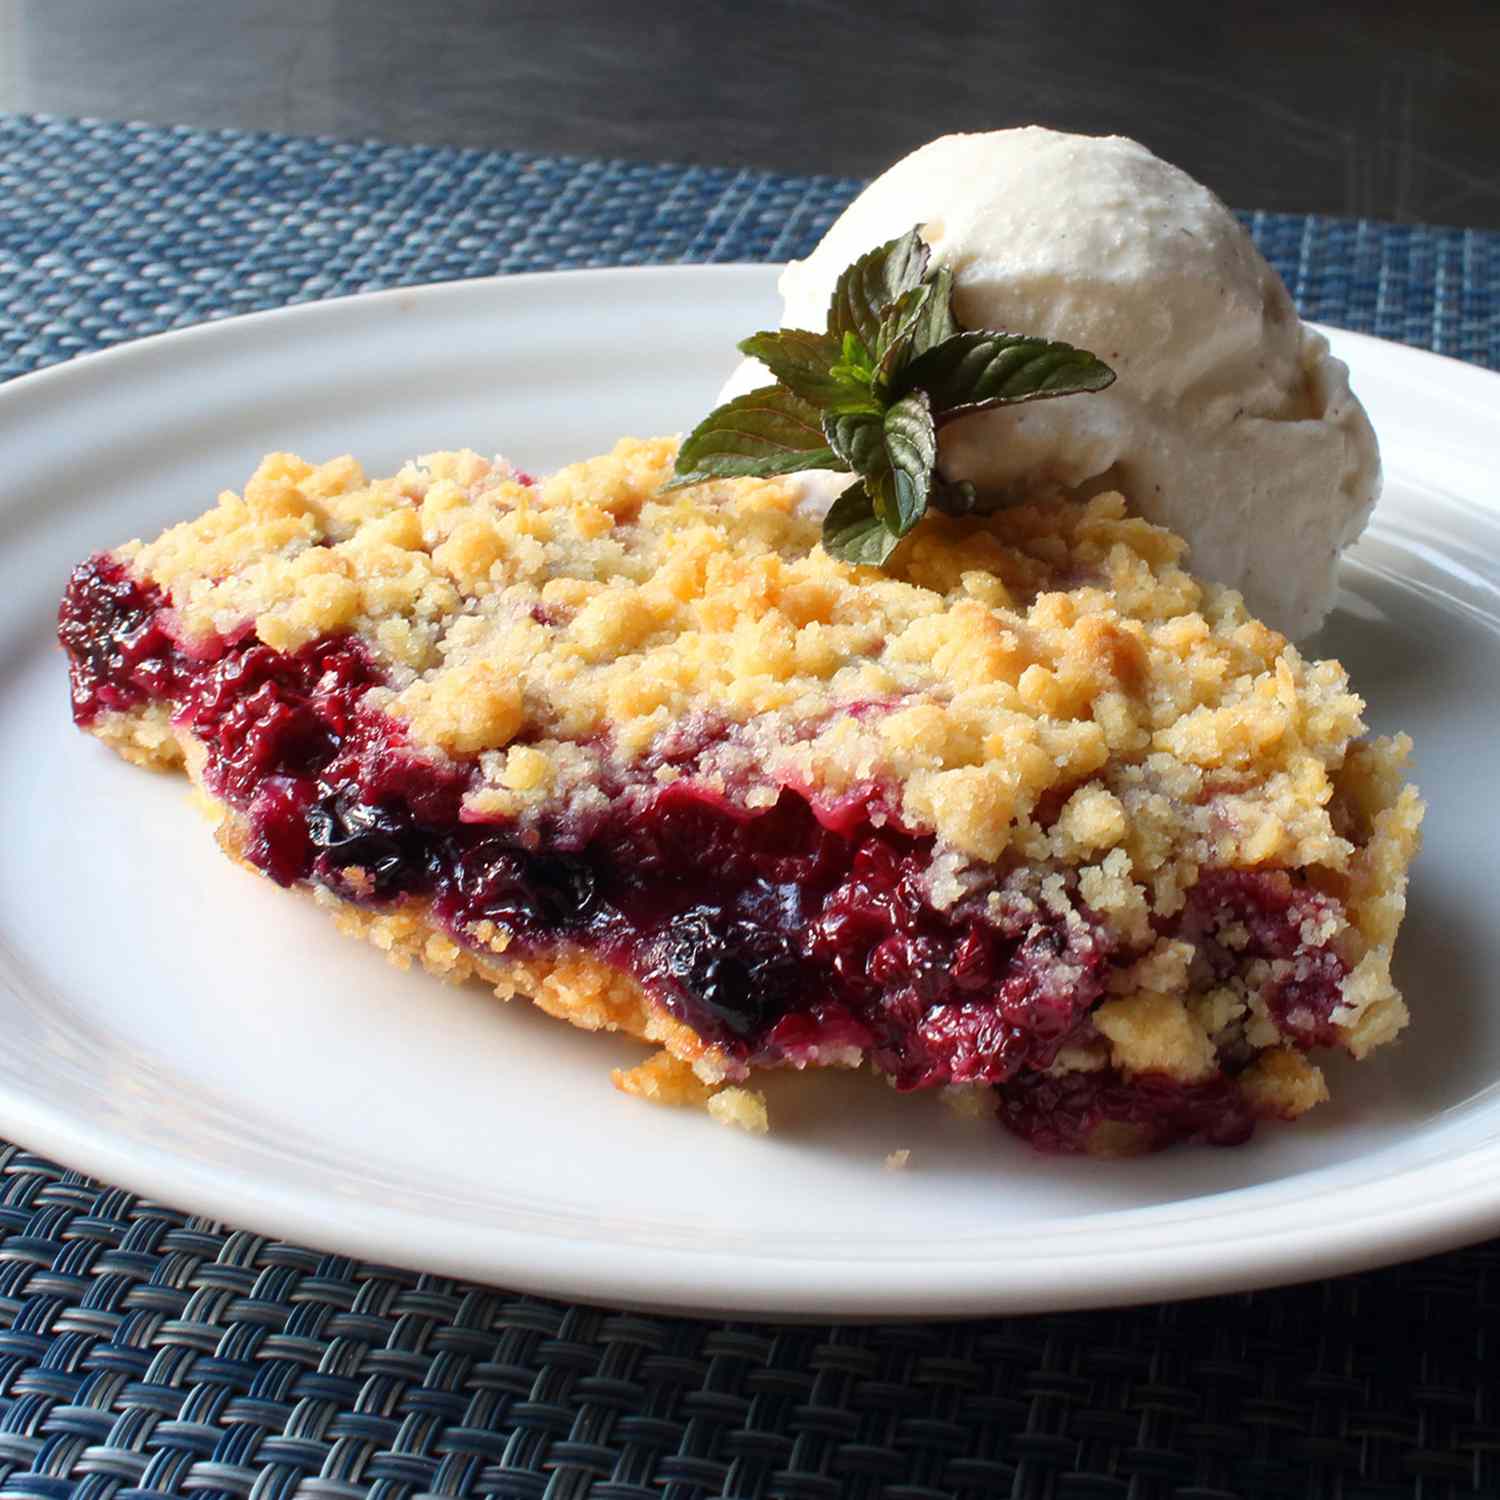 close up view of a Berry Crumble with scoop of ice cream on a plate